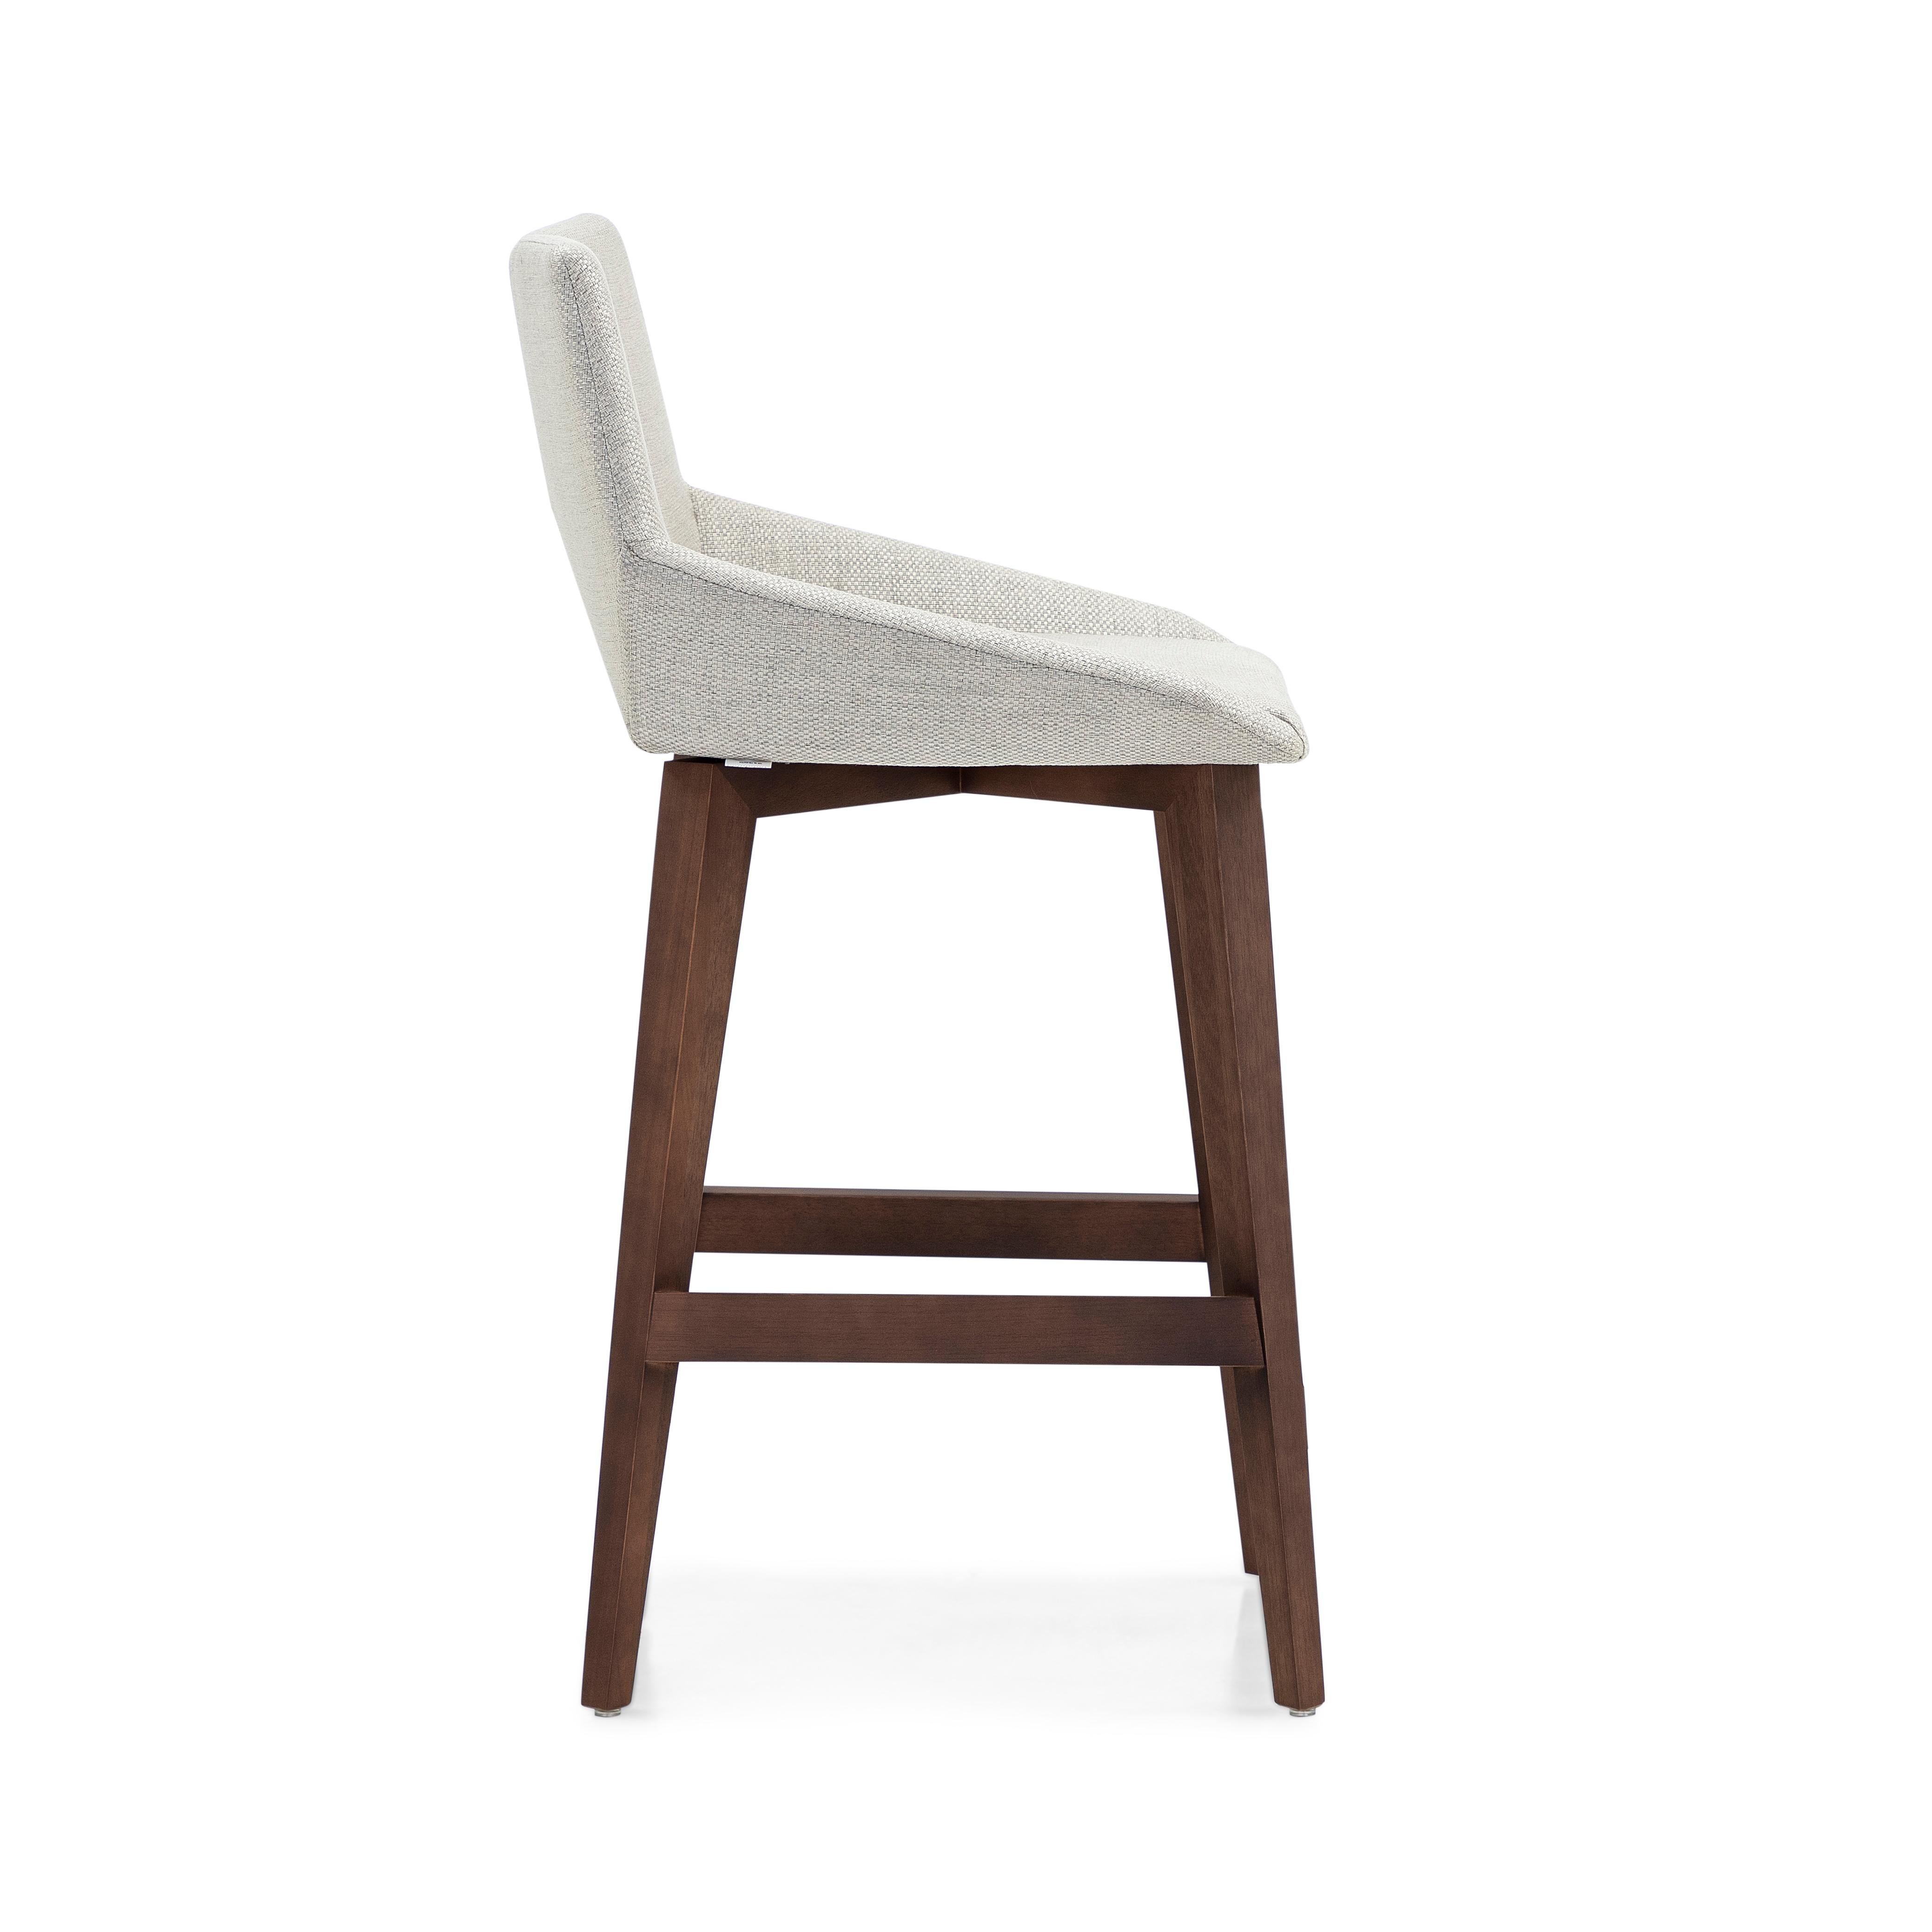 The geometric counter stool as the name says has geometric shapes and pure lines with its walnut wooden legs with the seat all wrapped in a beautiful and soft off-white fabric. All of these small details thought by architects and designers by our